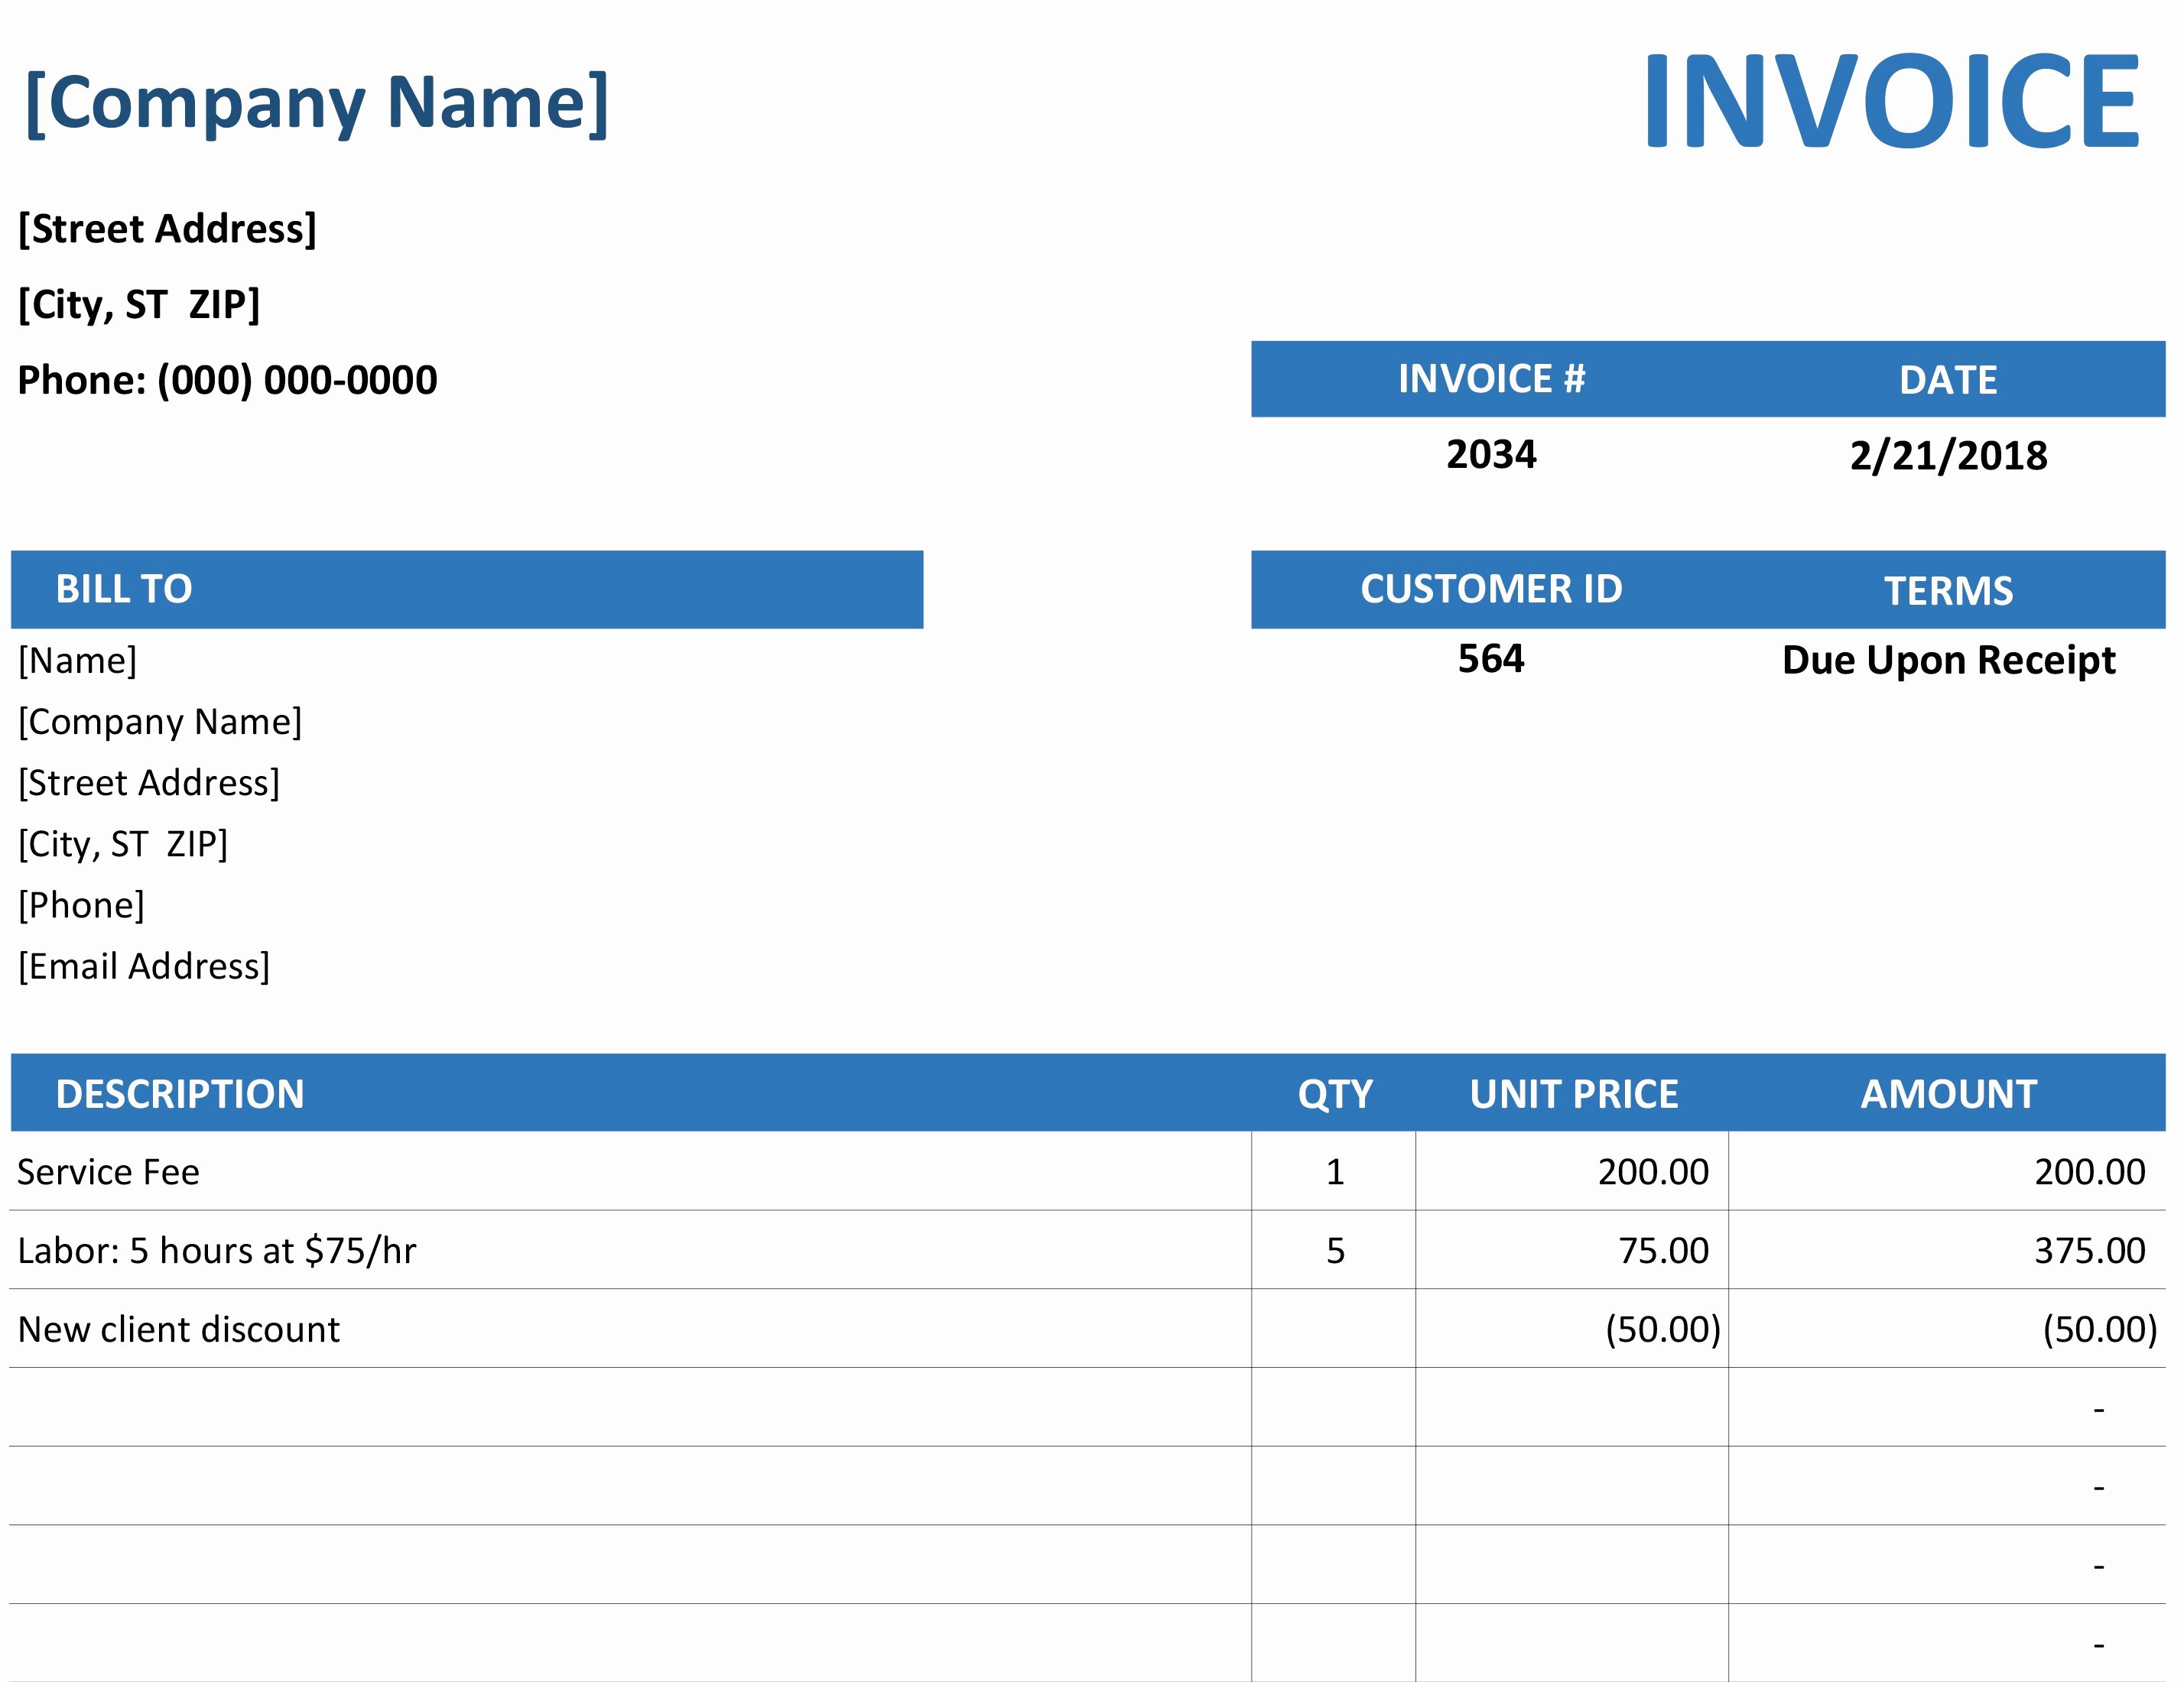 Microsoft Access Invoice Templates Lovely Invoice